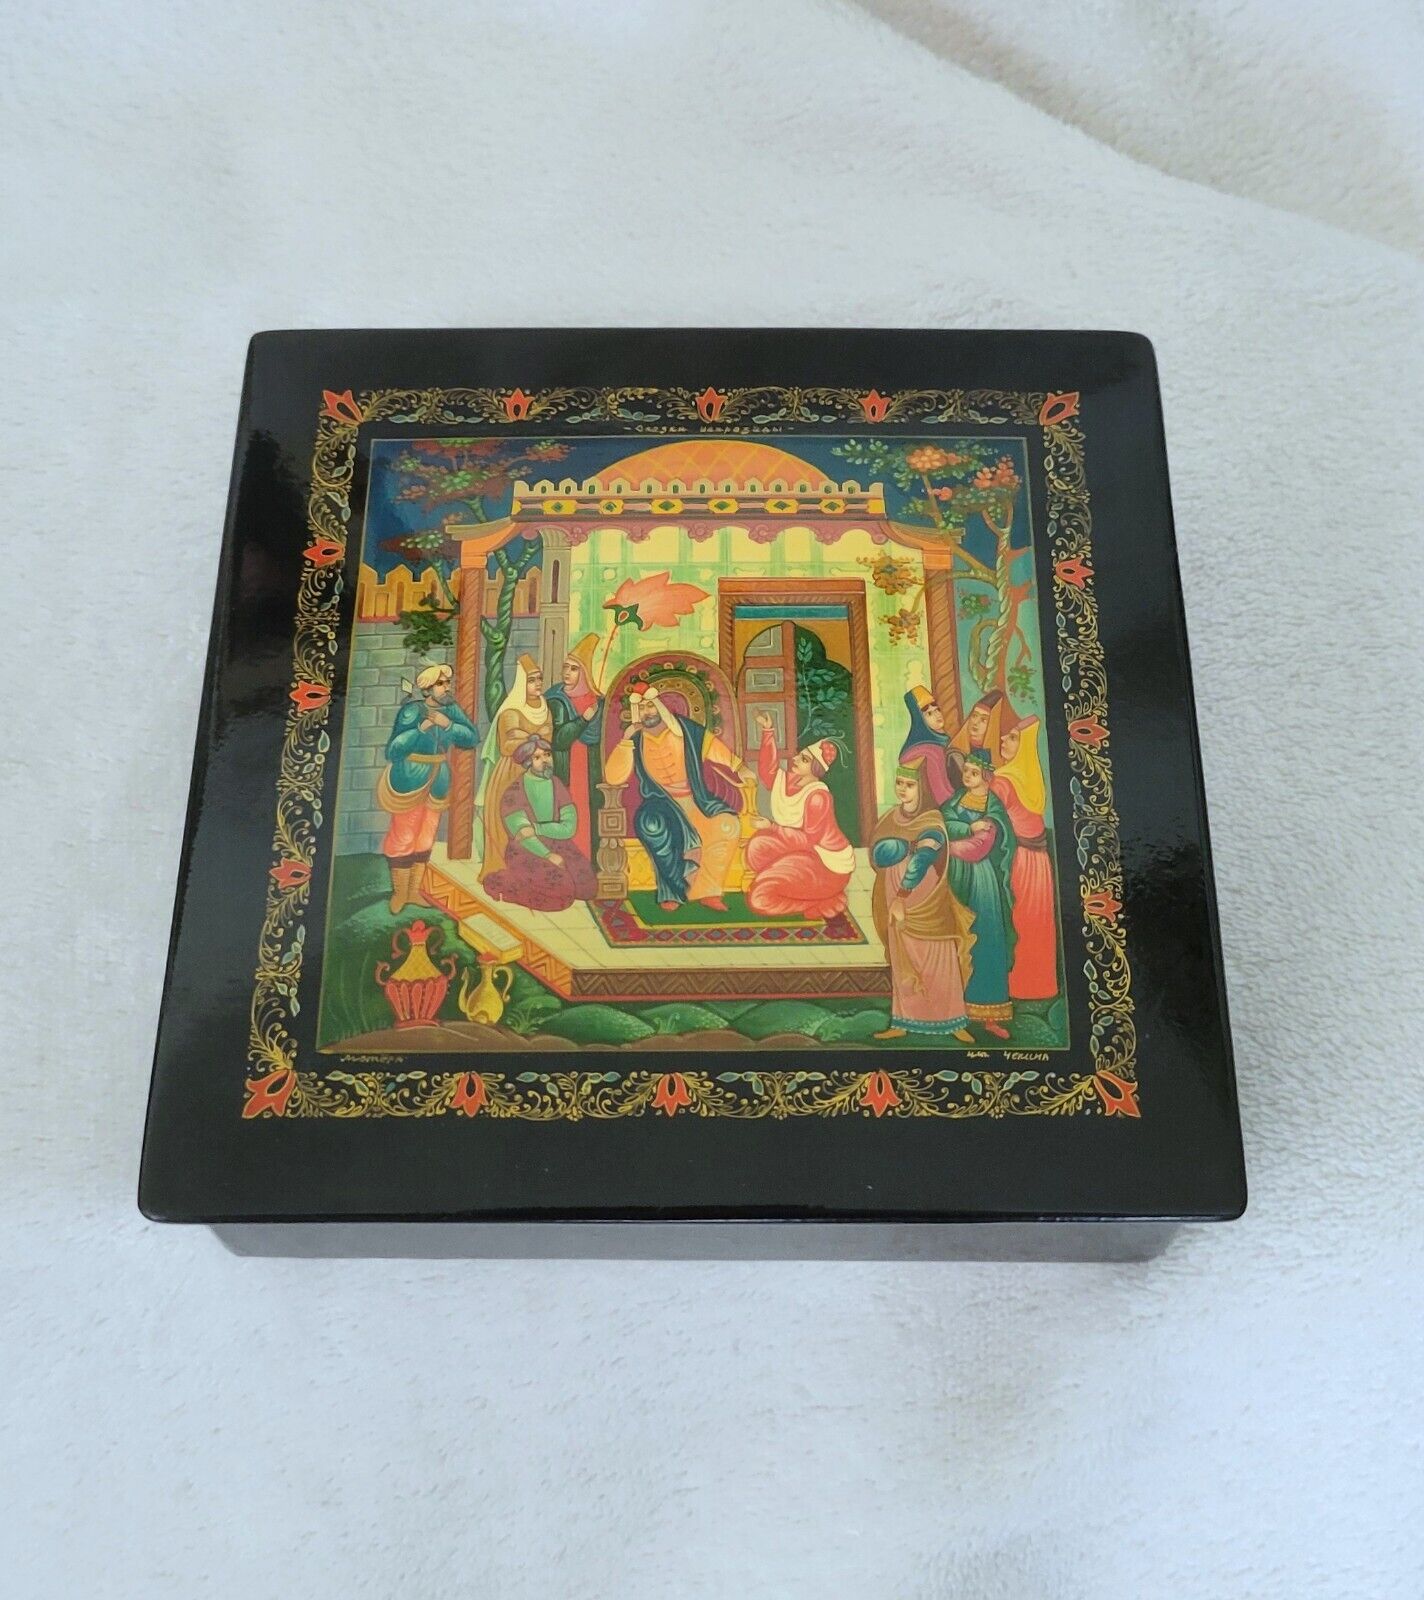 Russian Hand Painted Lacquer Box Mstera Scheherazade Tales Vintage 